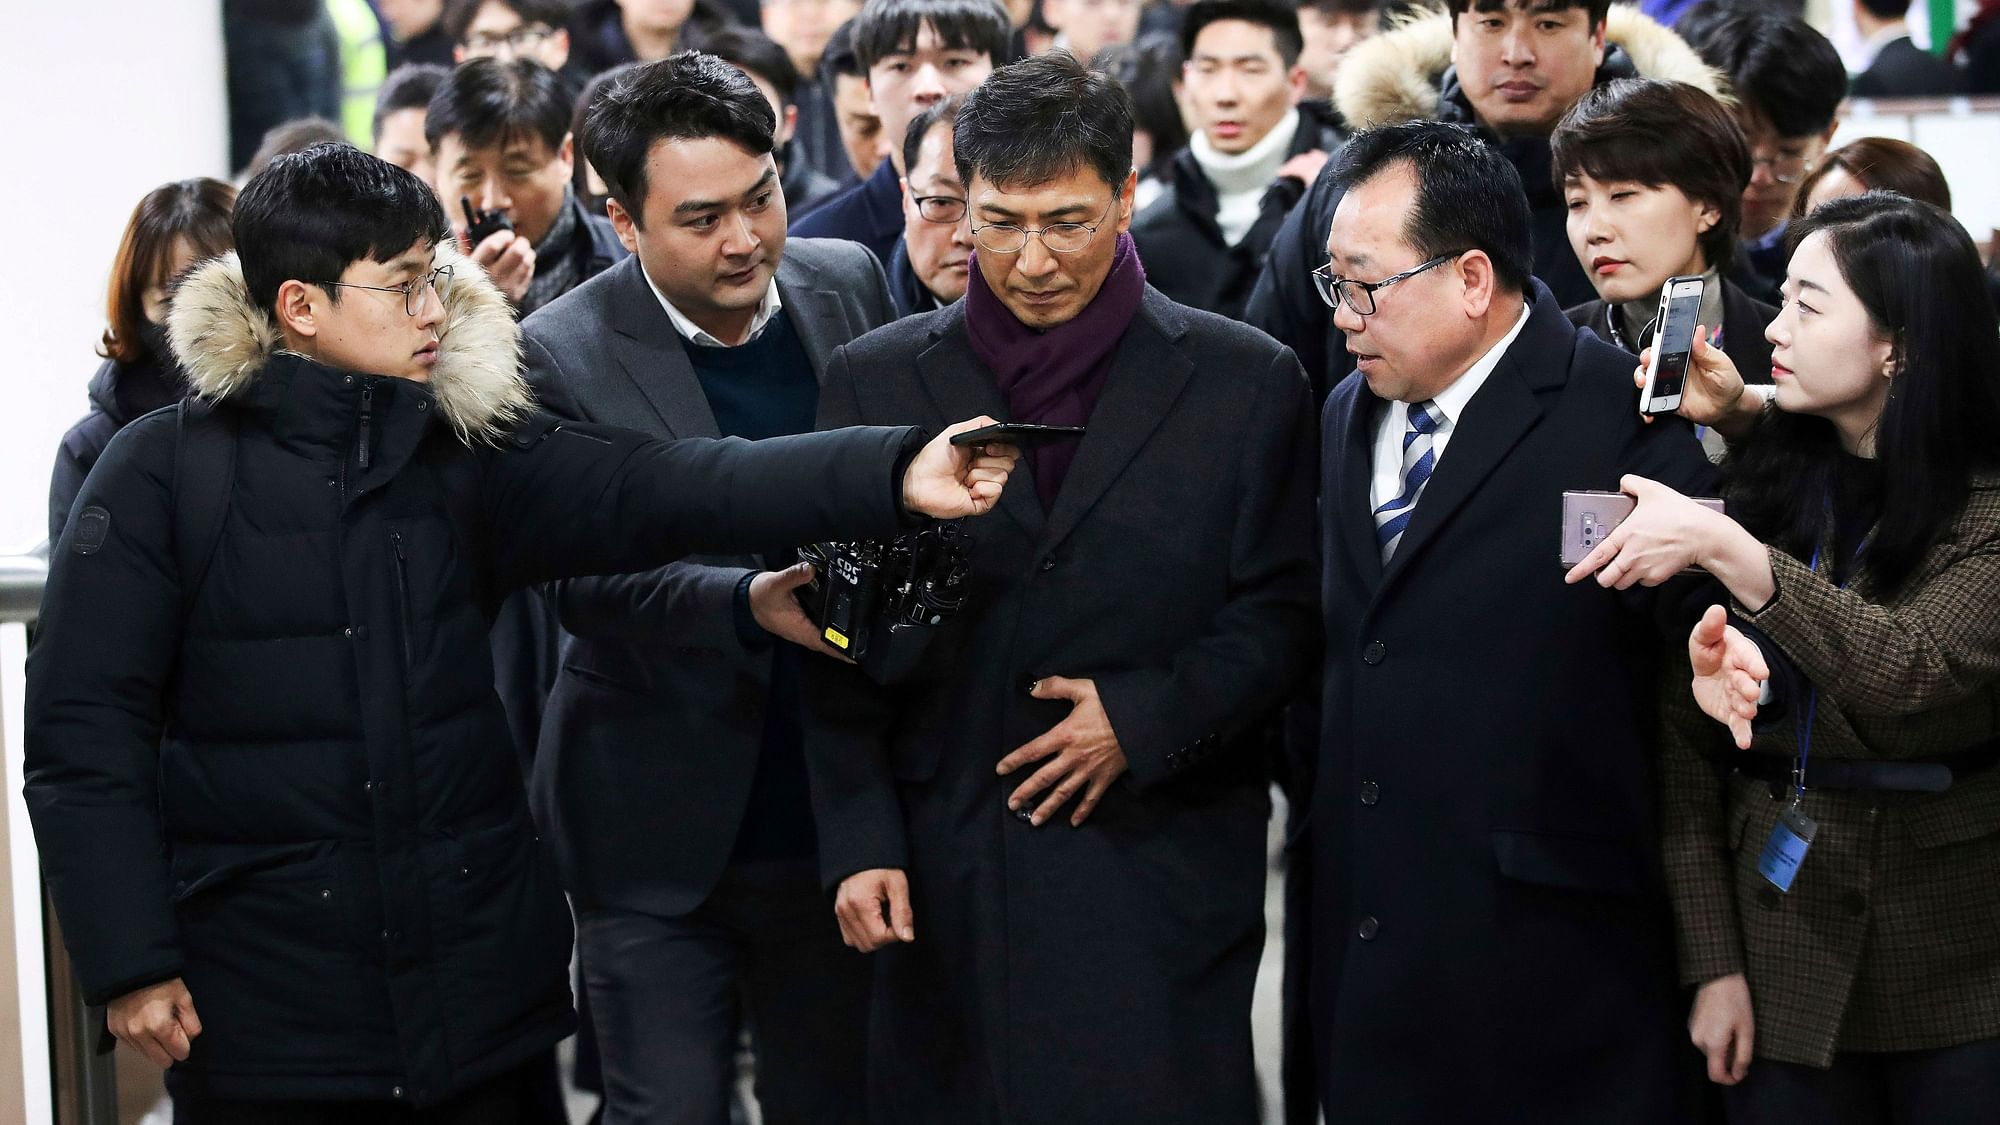 Ahn Hee-jung (center), a former governor of South Korean province, arrives at the Seoul High Court in Seoul, South Korea.